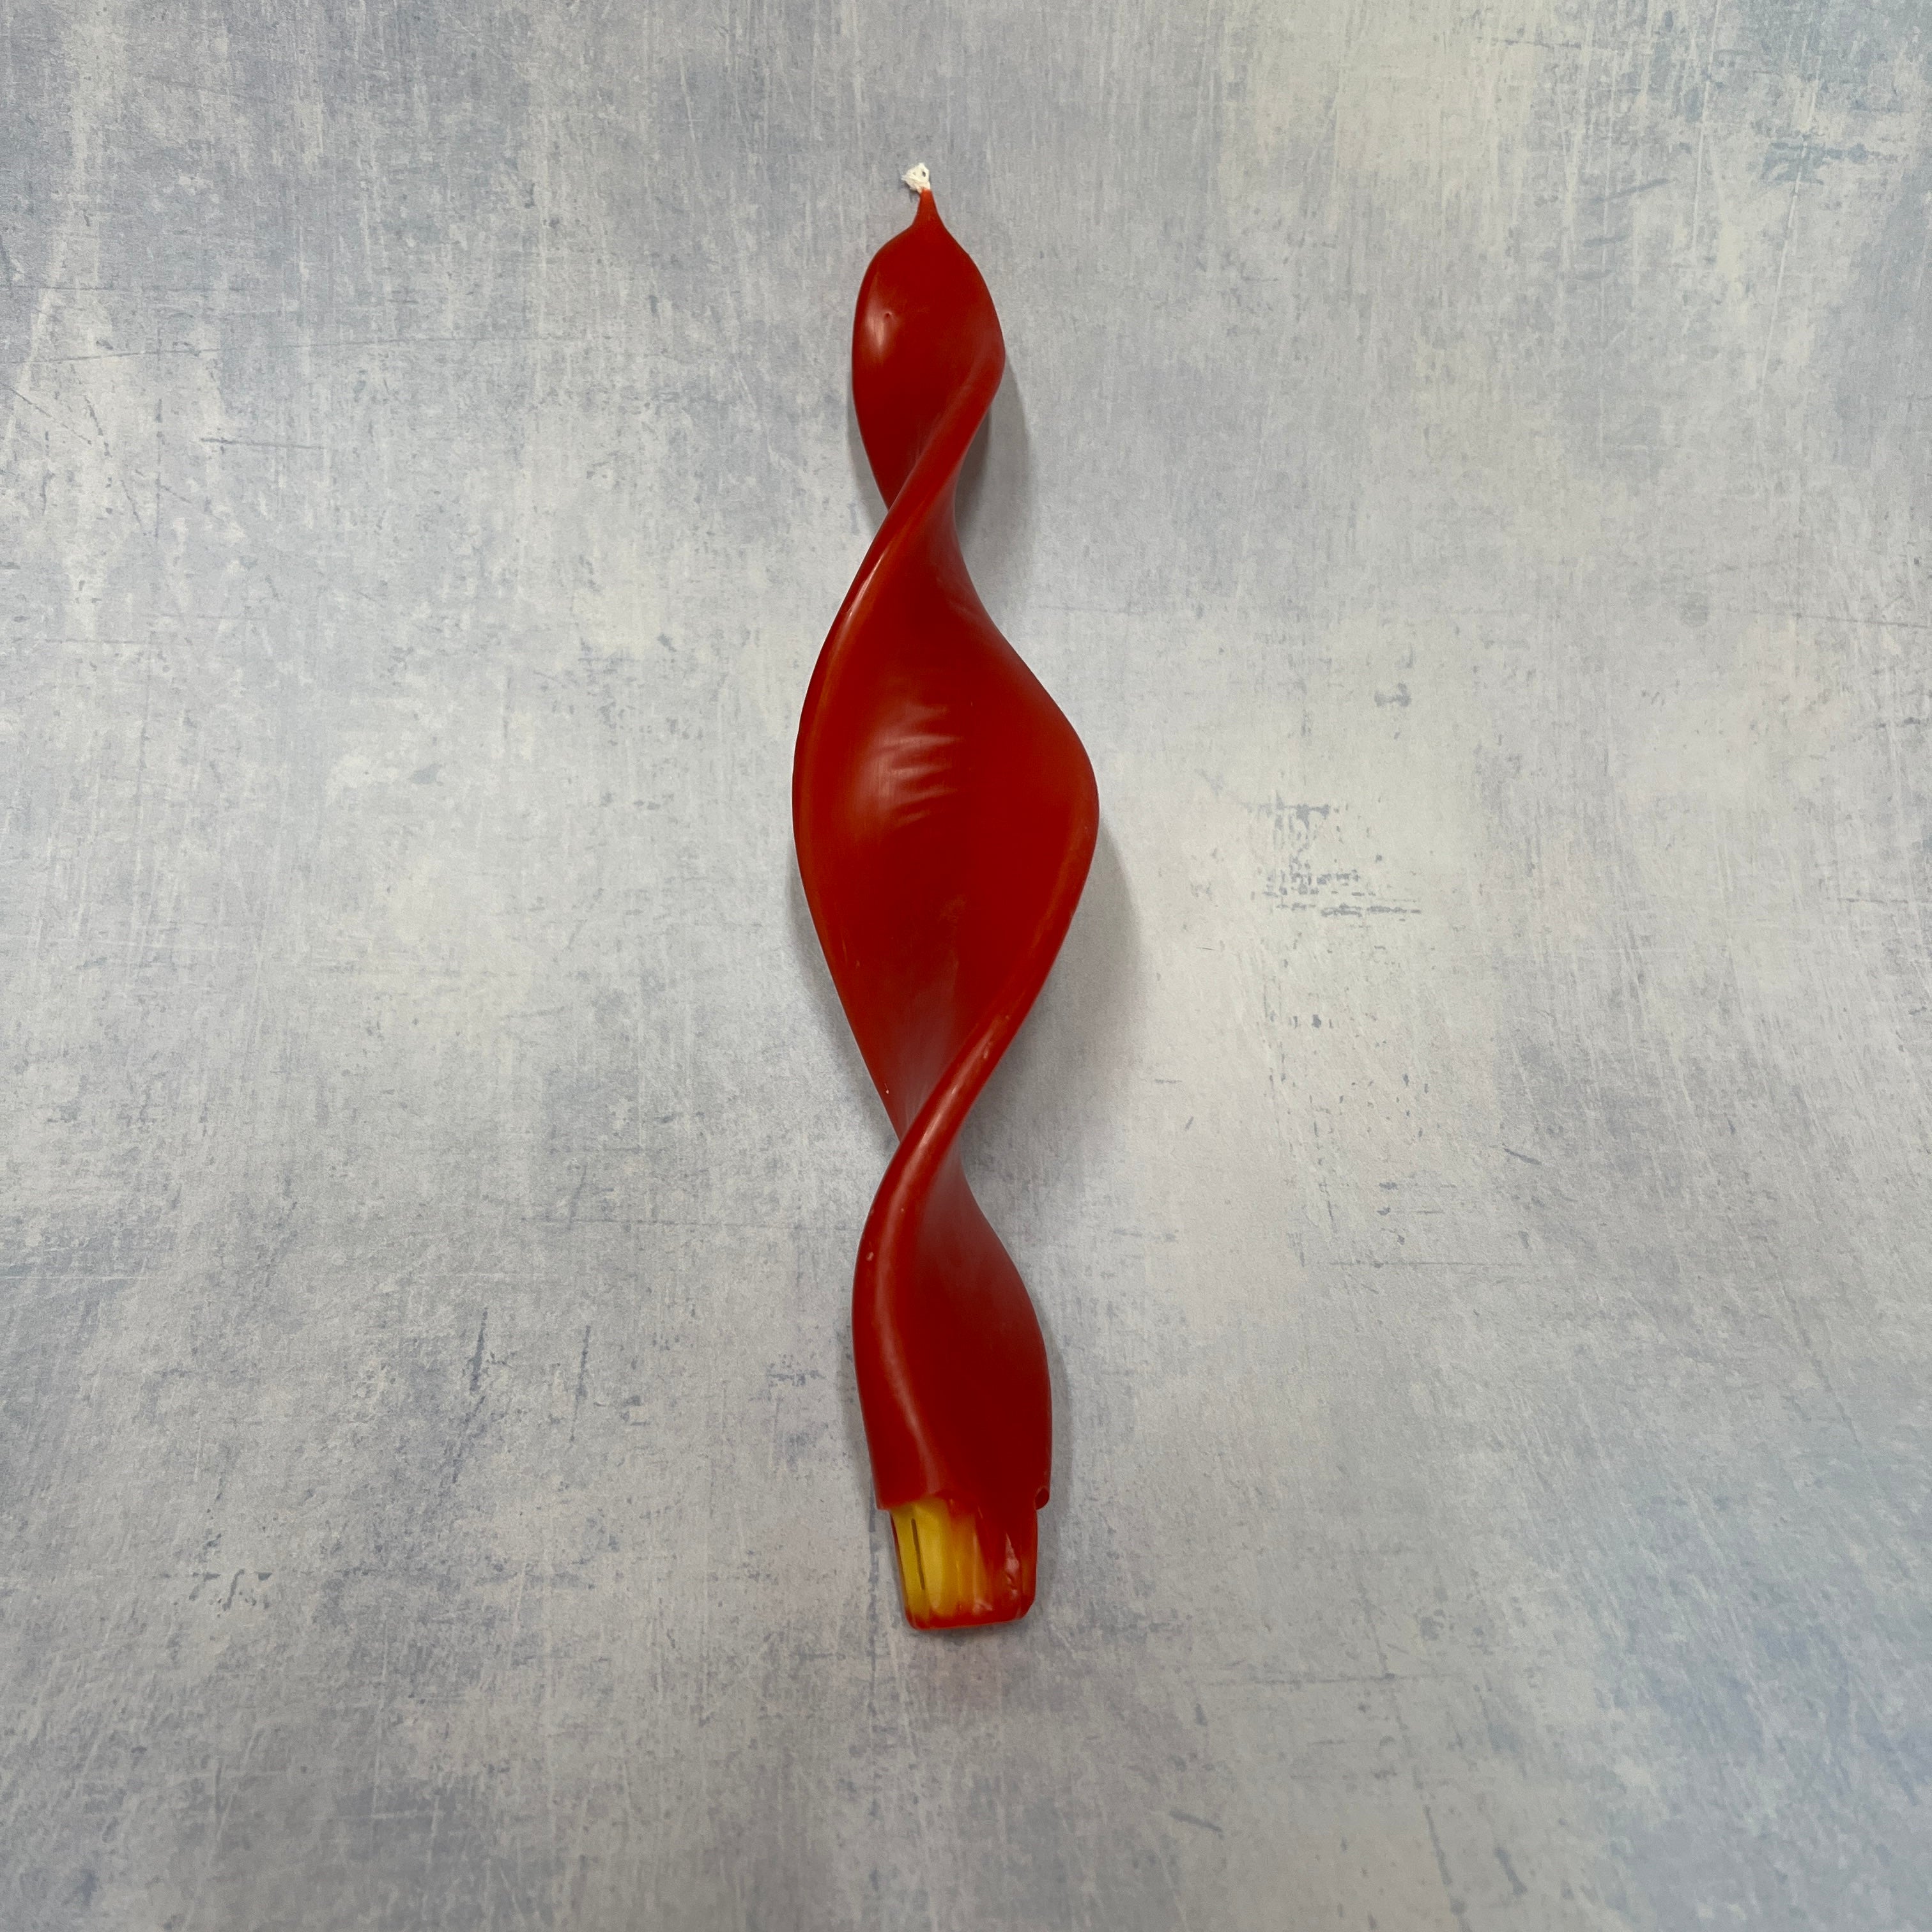 Winged beeswax candle